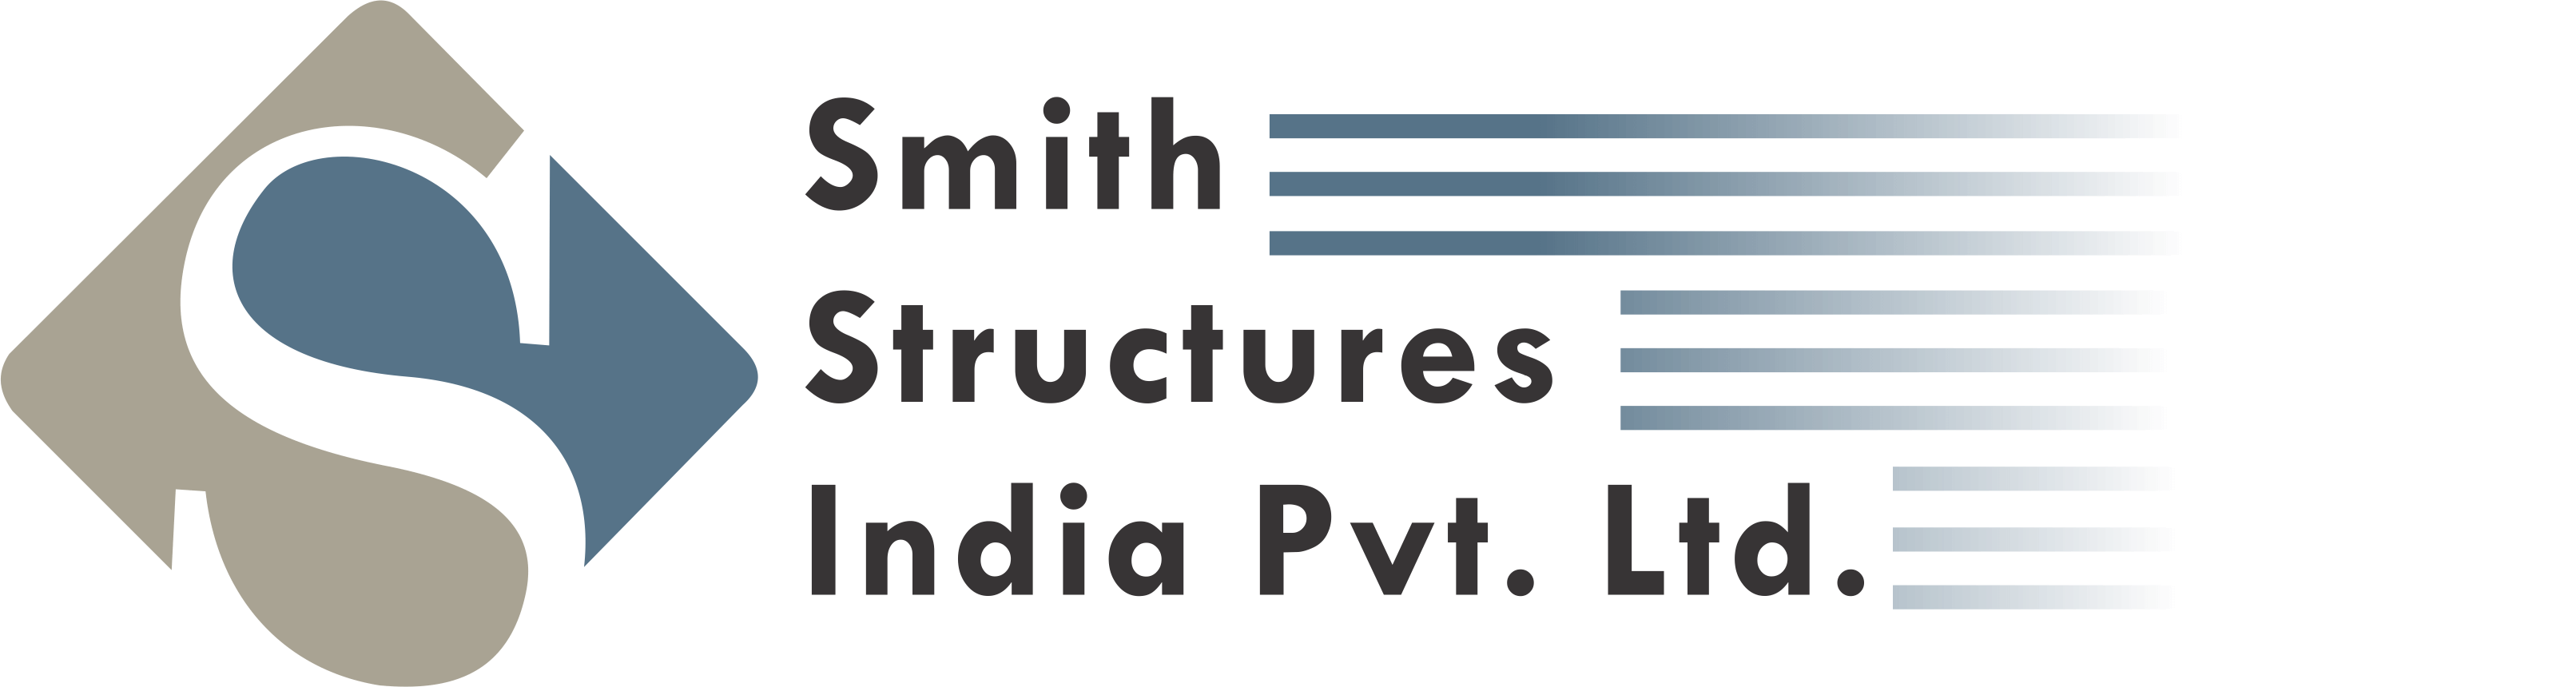 Manufacturing Facilities | Smith Structures